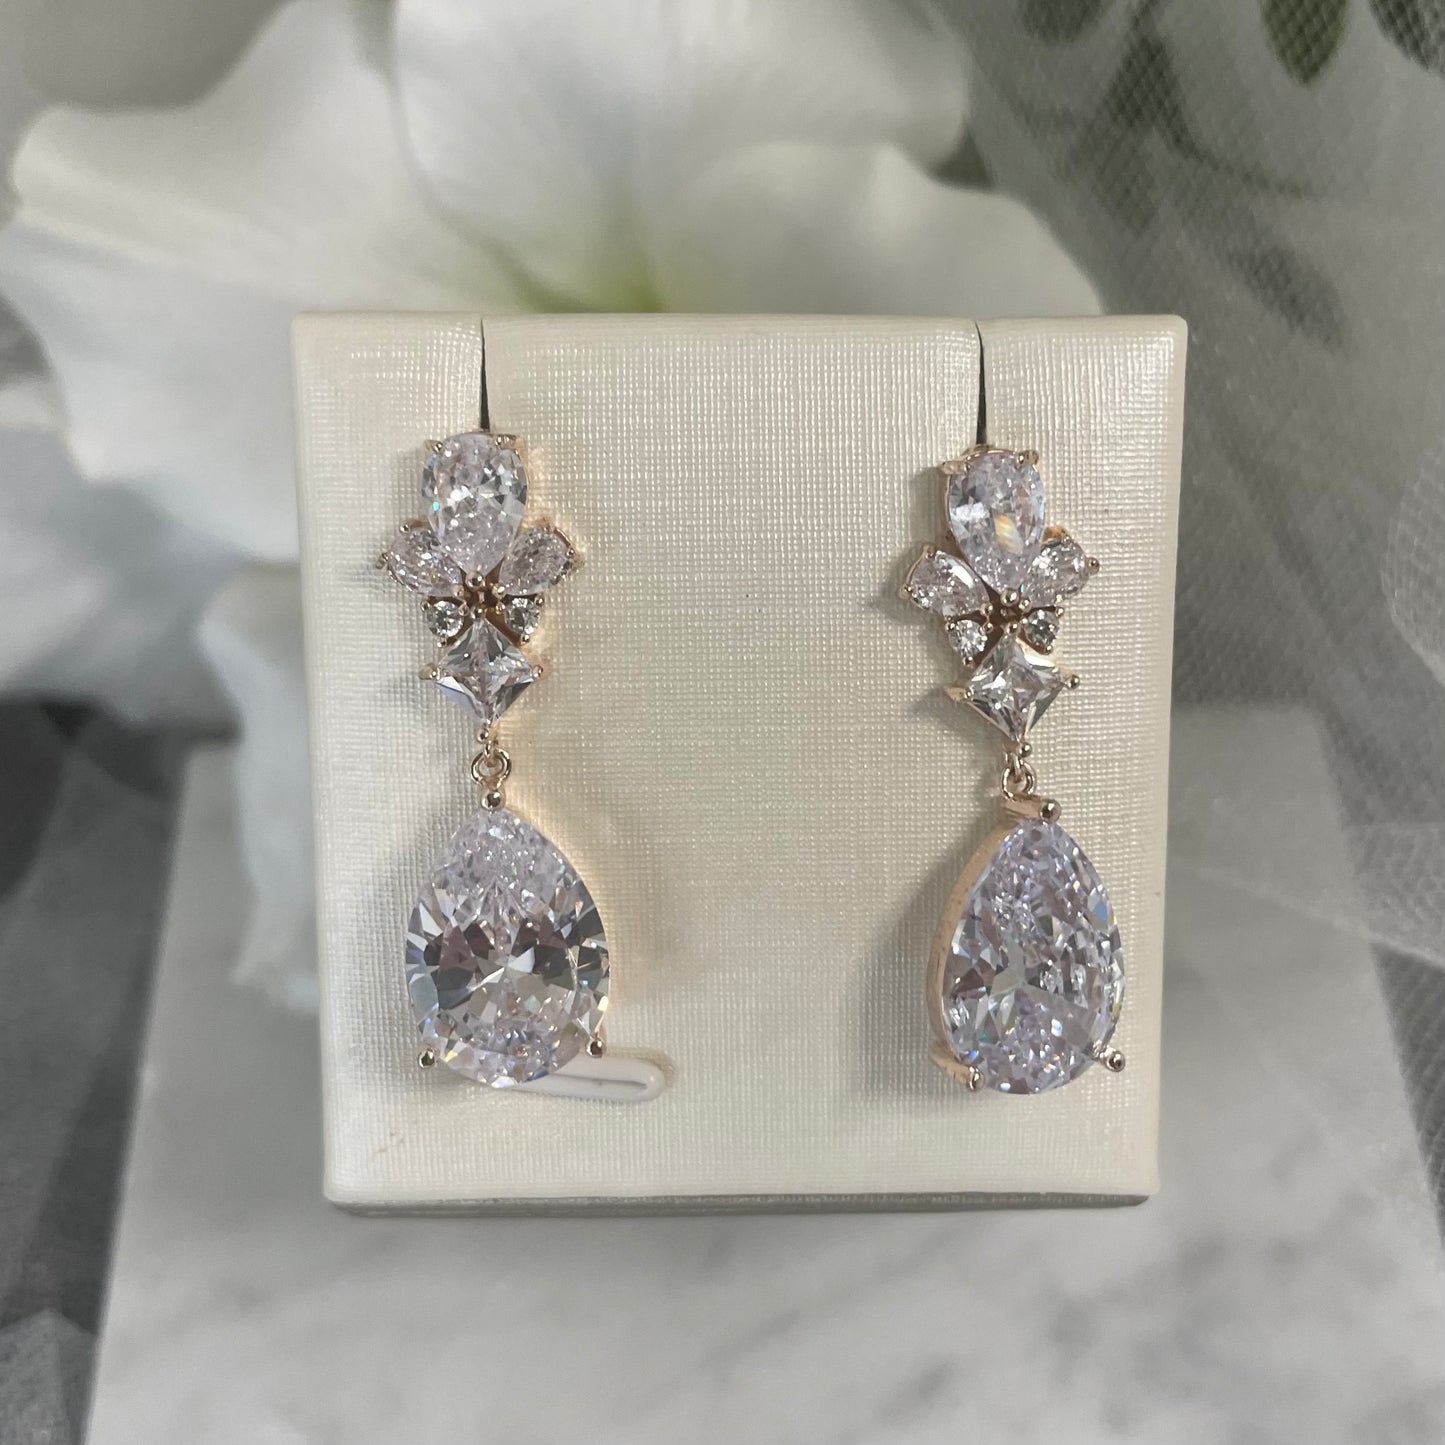 Talia Crystal Drop Bridal Earrings in Silver and Rose Gold, featuring sparkling zircon crystals, perfect for enhancing any bride's look on her wedding day.